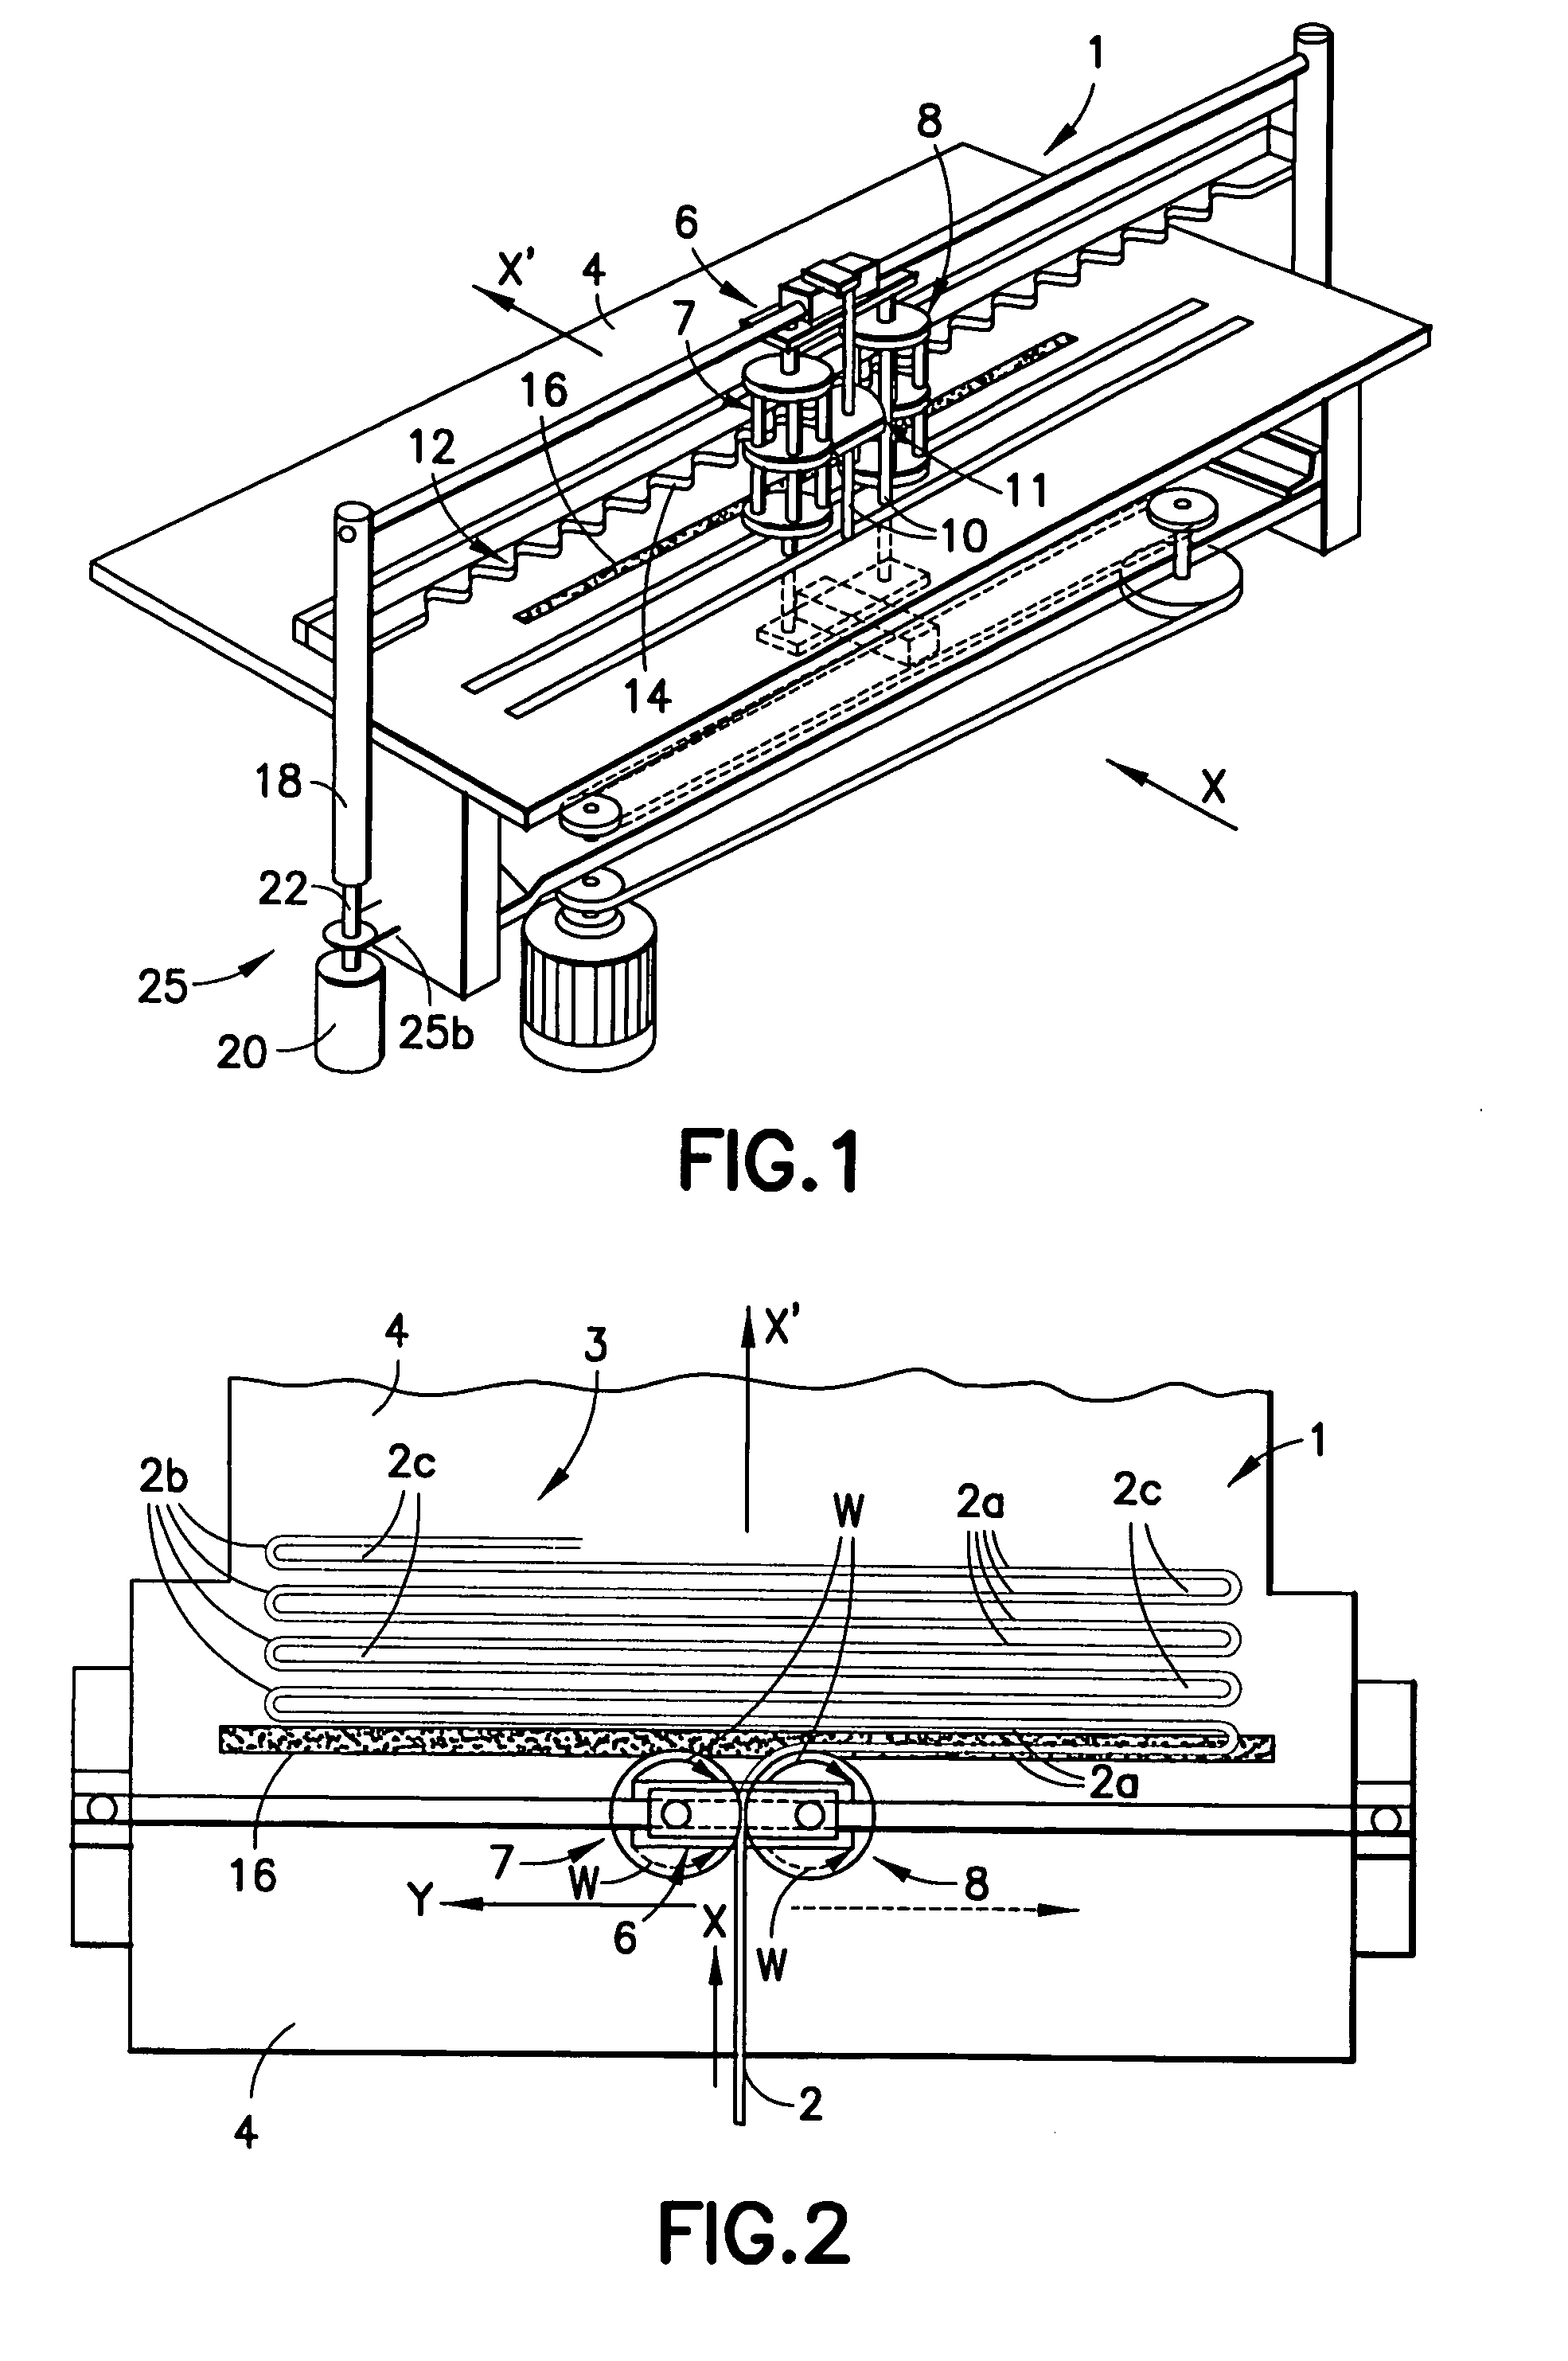 System for packaging a flexible web that is layered in zigzag loops, in particular a textile web